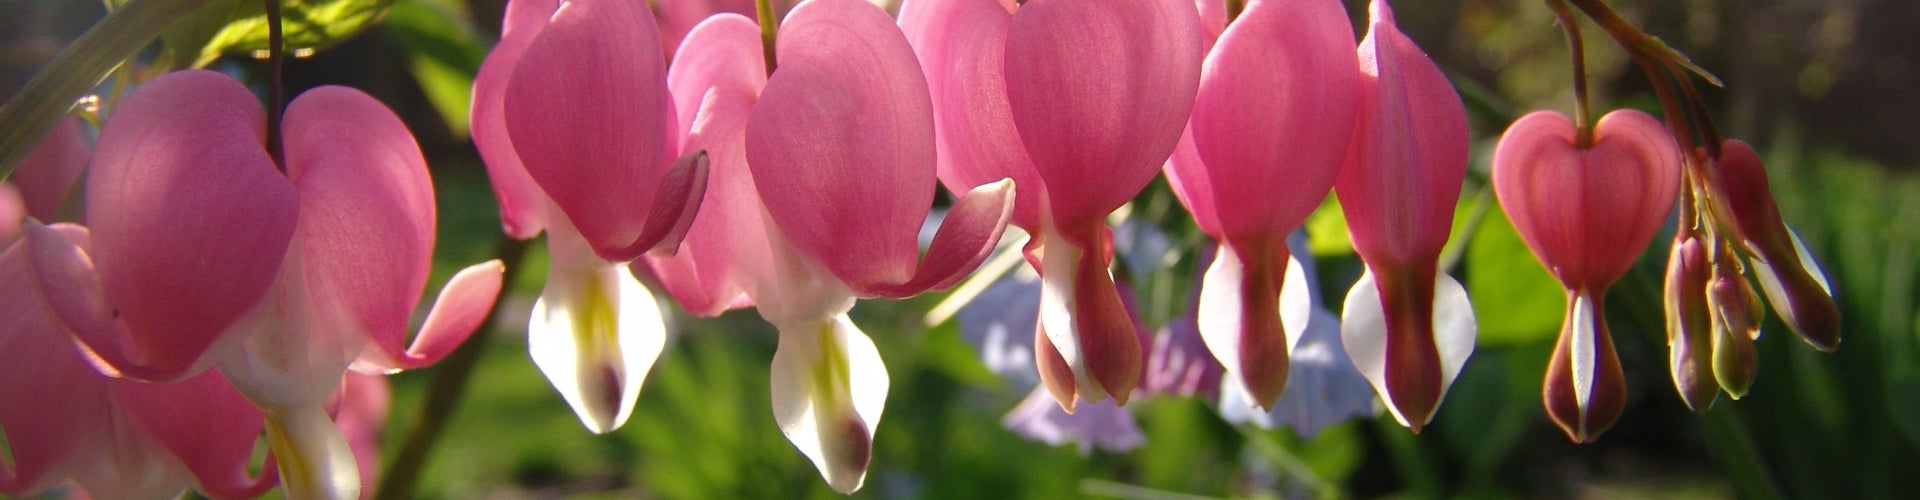 Pink and white bleeding heart flowers dangling from a vine. 